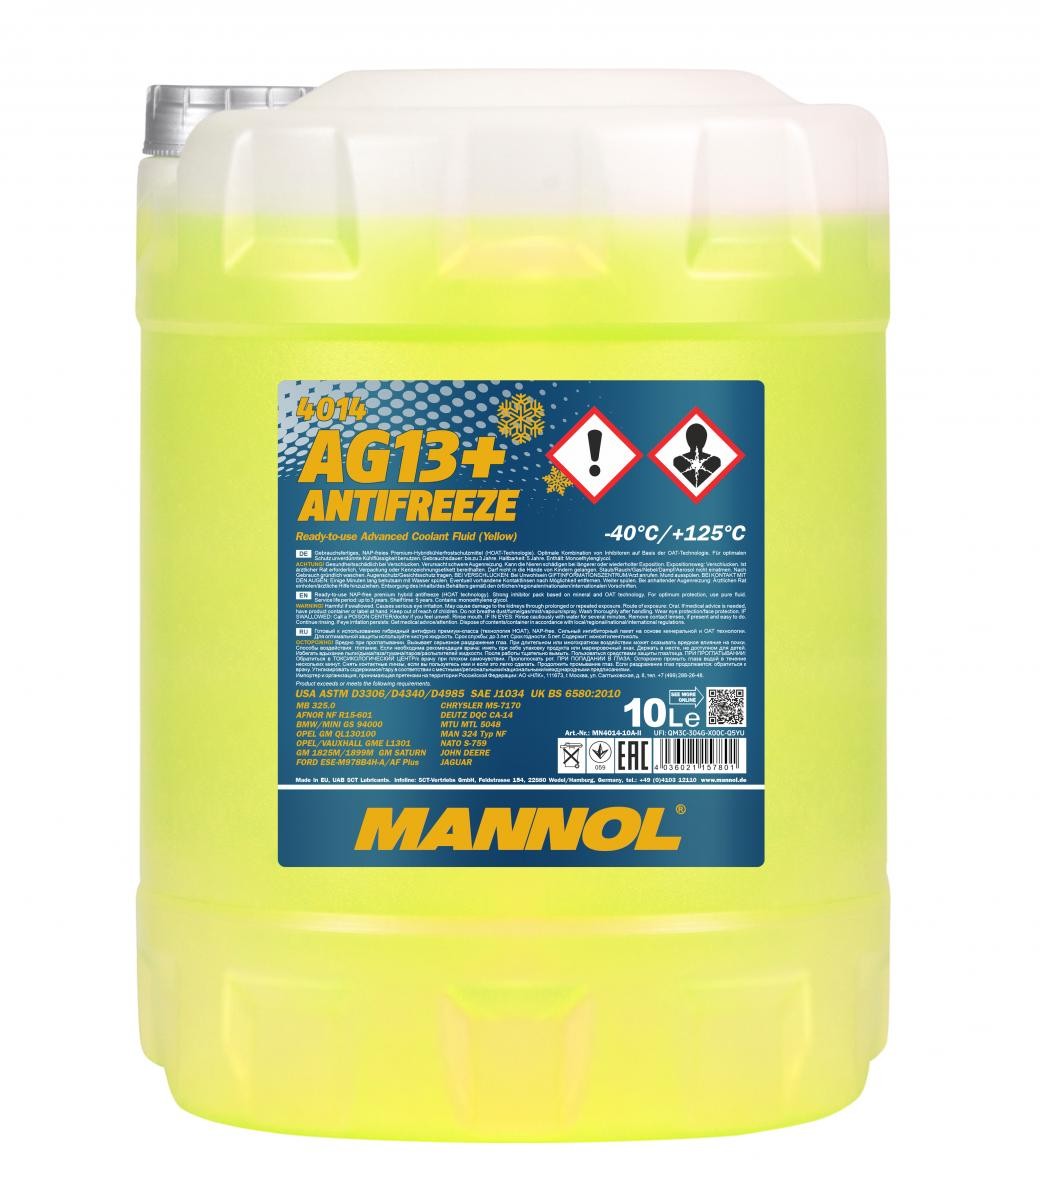 MANNOL MN4014-10 Antifreeze VW experience and price